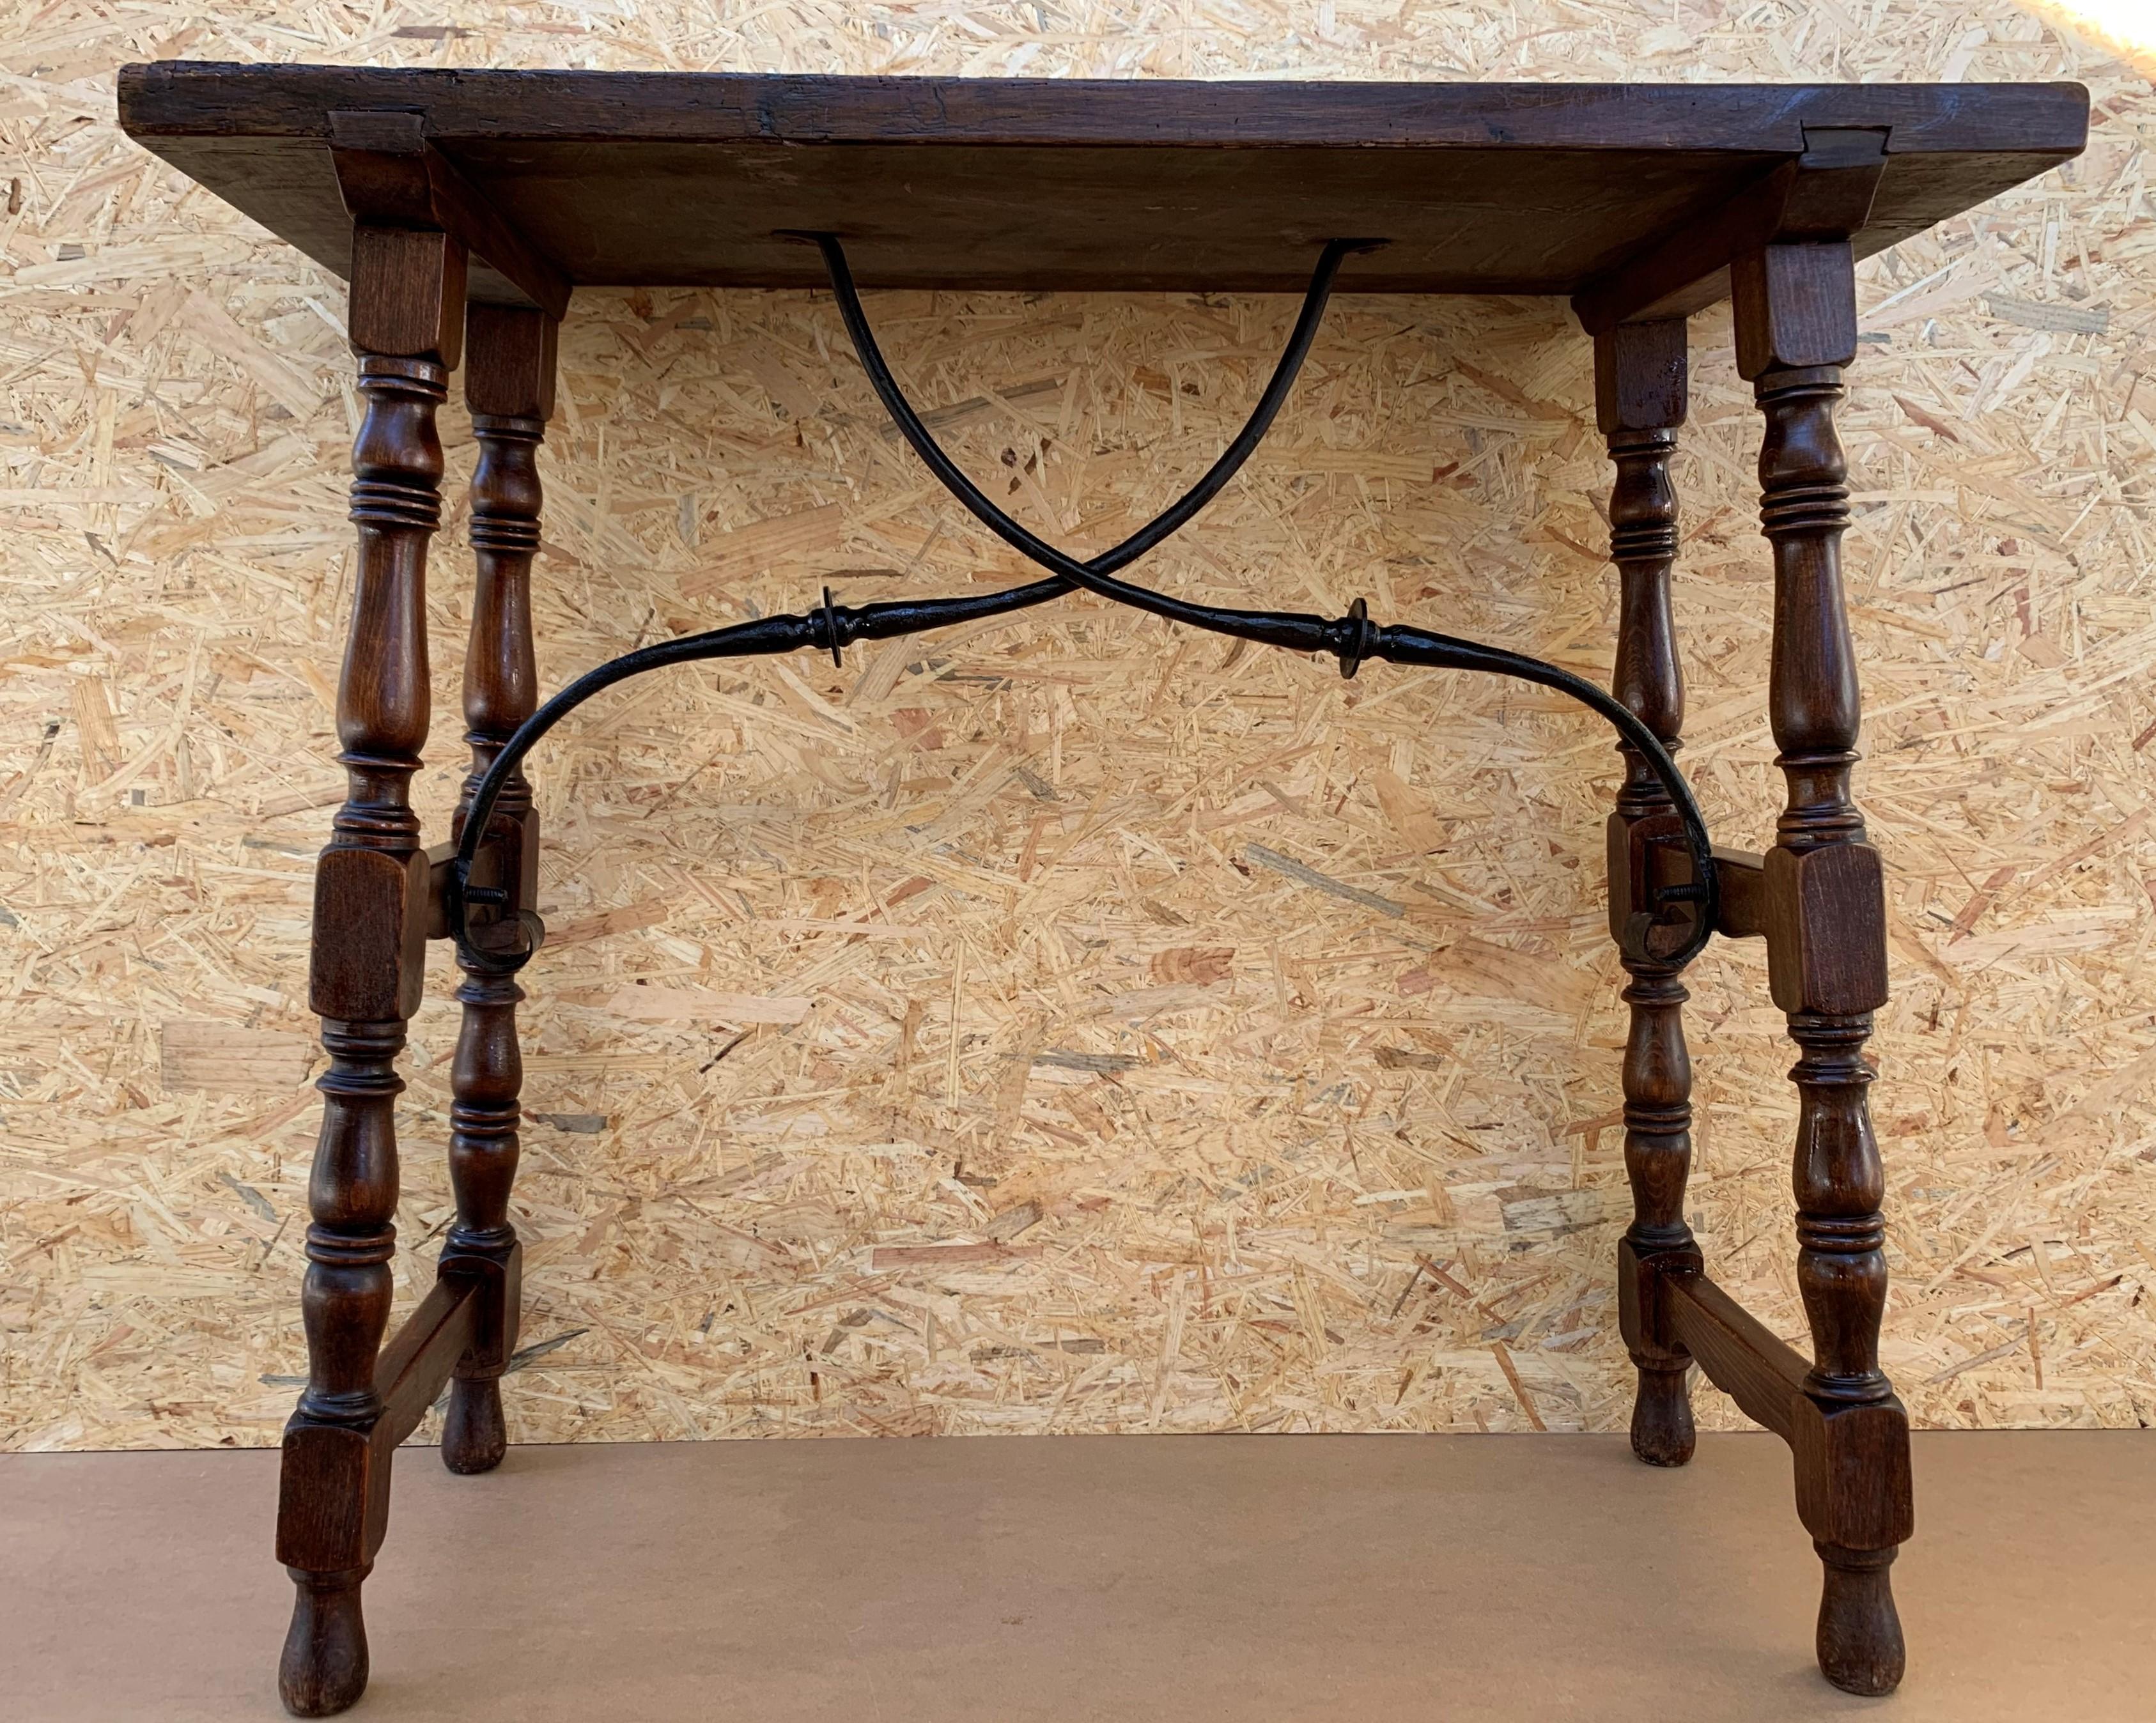 19th century Spanish console table with iron stretcher.
Beautiful turned legs.
Side table. Baroque
completely restored.